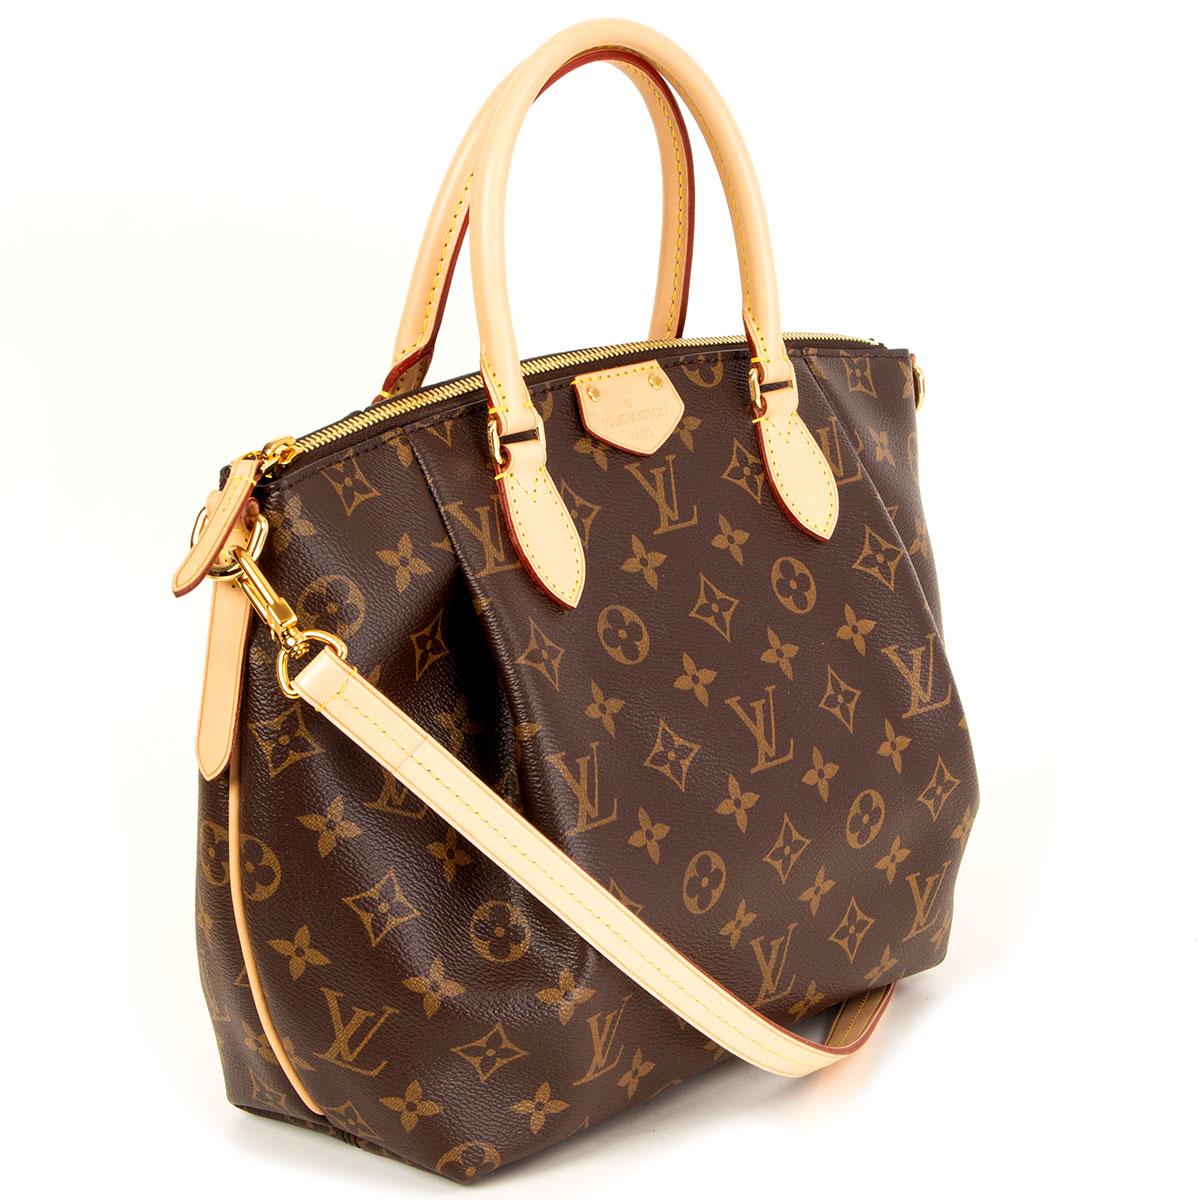 100% authentic Louis Vuitton Turenne PM shoulder bag in Ebene monogram canvas featuring structural front pleats and dual cowhide leather top handles as well as an adjustable and detachable shoulder strap. Opens with a zipper on top and is lined in